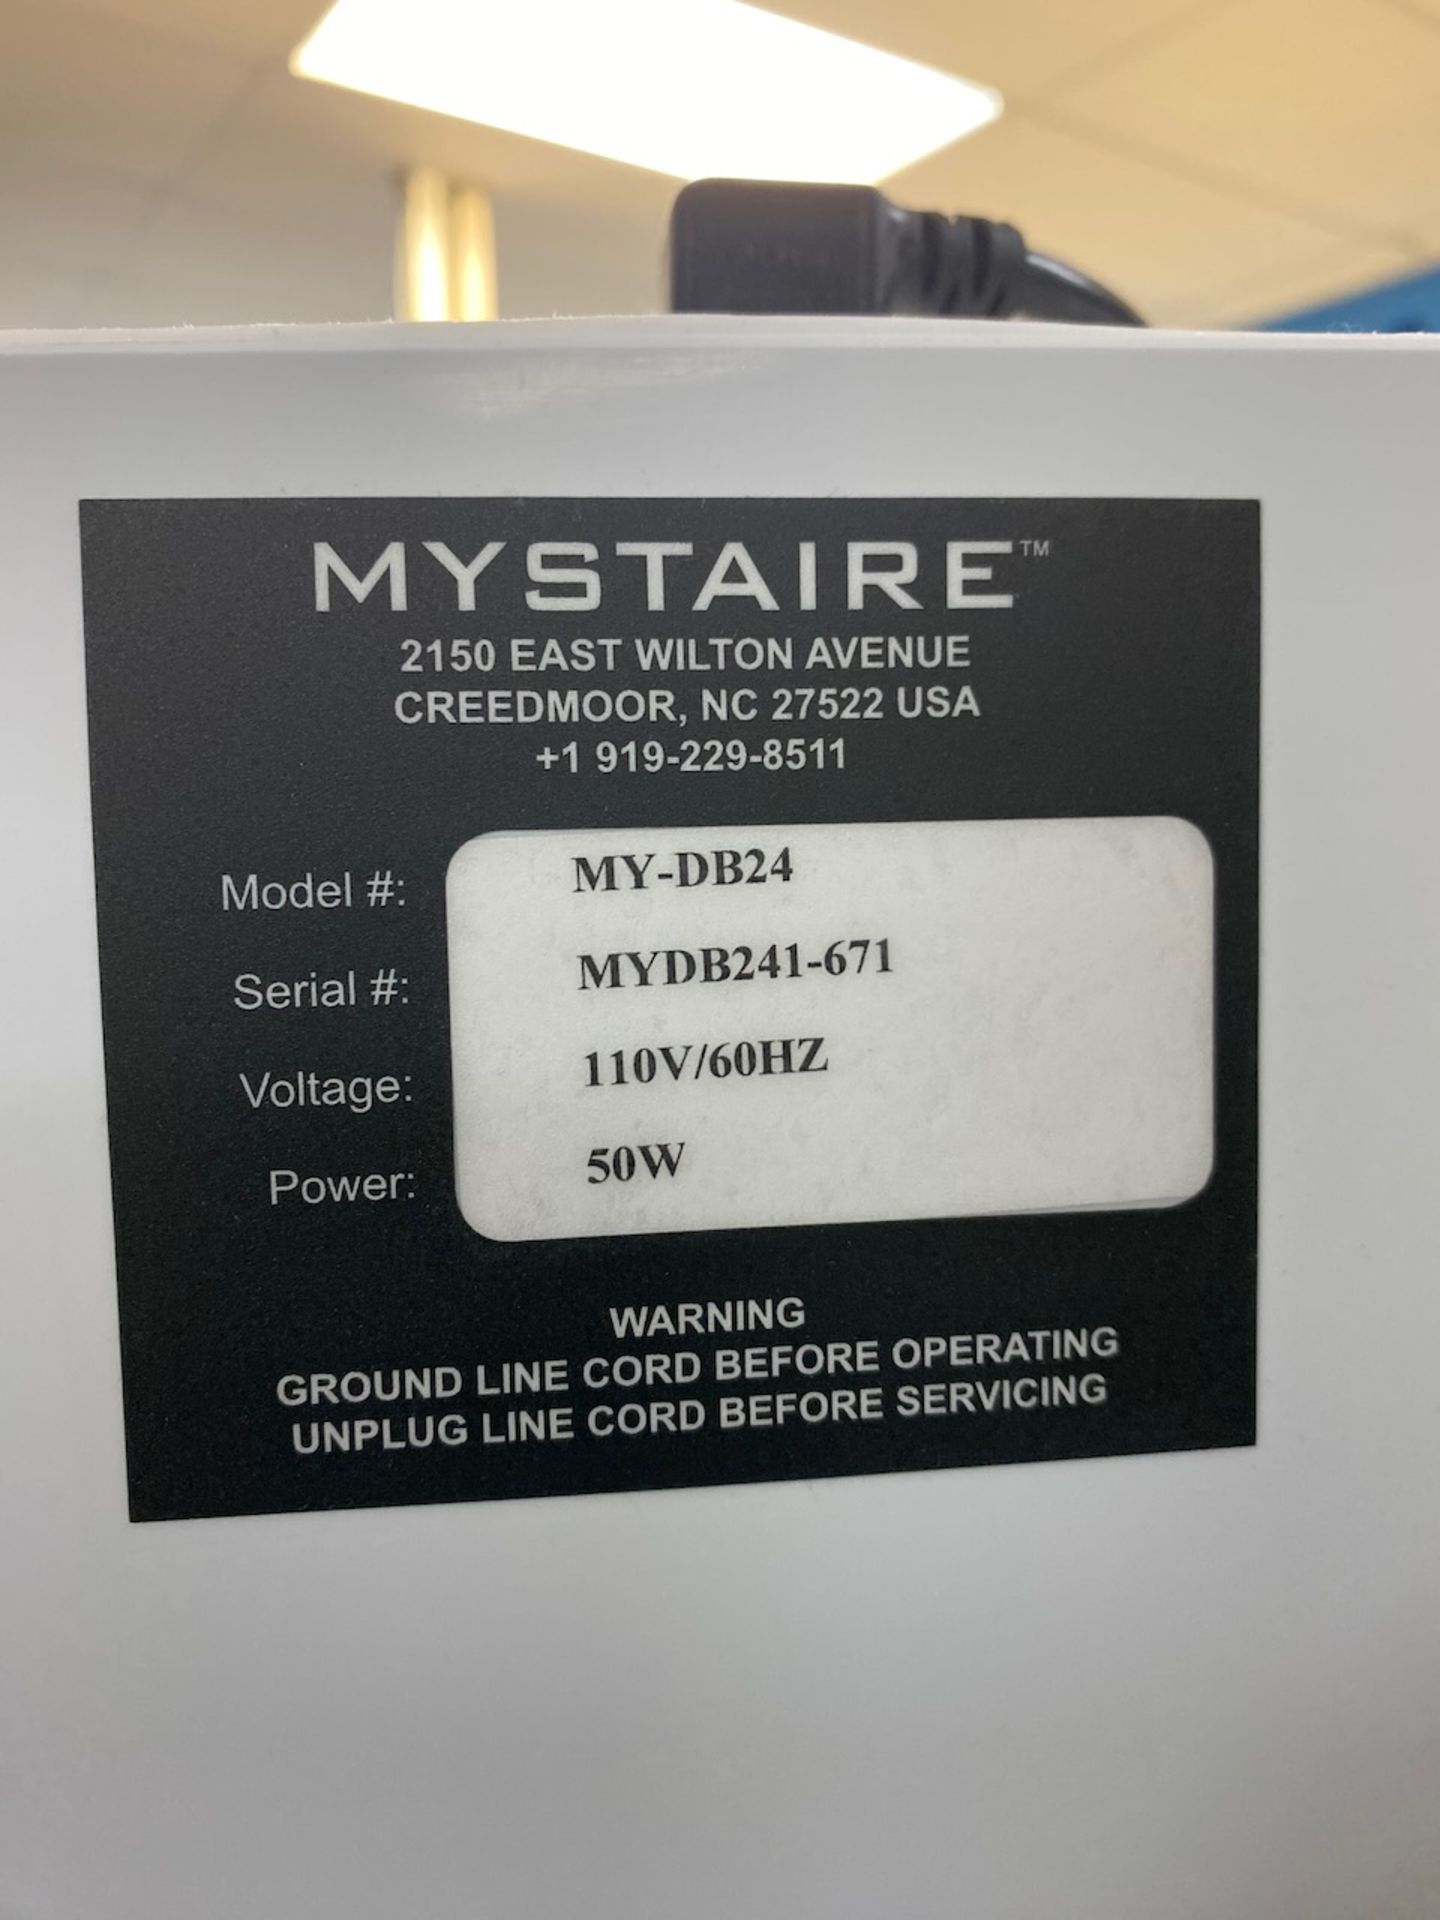 Mystaire PCR Workstation - Image 3 of 3